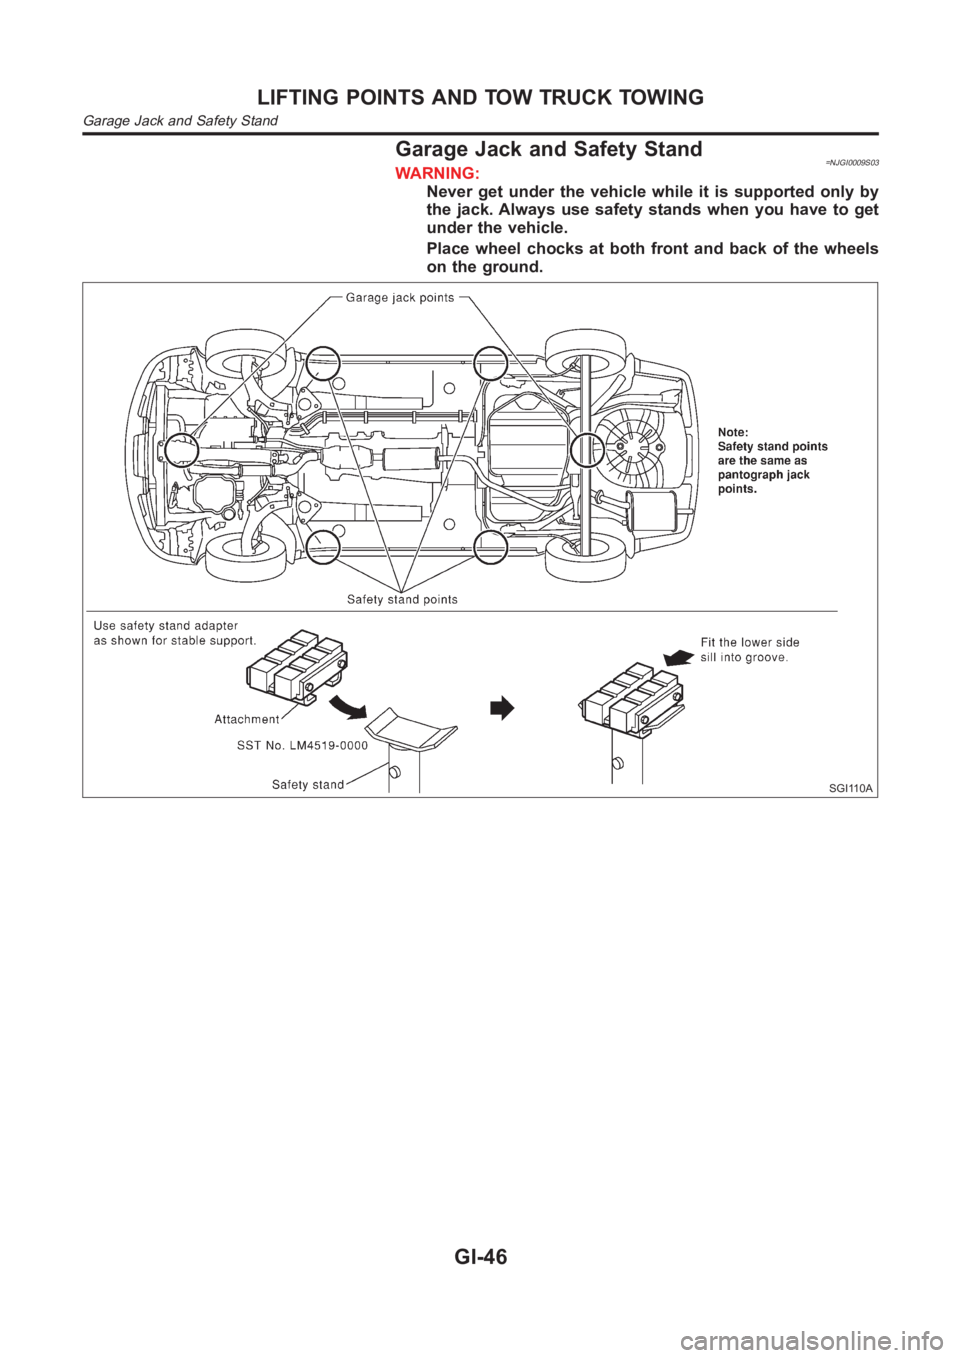 NISSAN ALMERA N16 2003  Electronic Service Manual Garage Jack and Safety Stand=NJGI0009S03WARNING:
Never get under the vehicle while it is supported only by
the jack. Always use safety stands when you have to get
under the vehicle.
Place wheel chocks